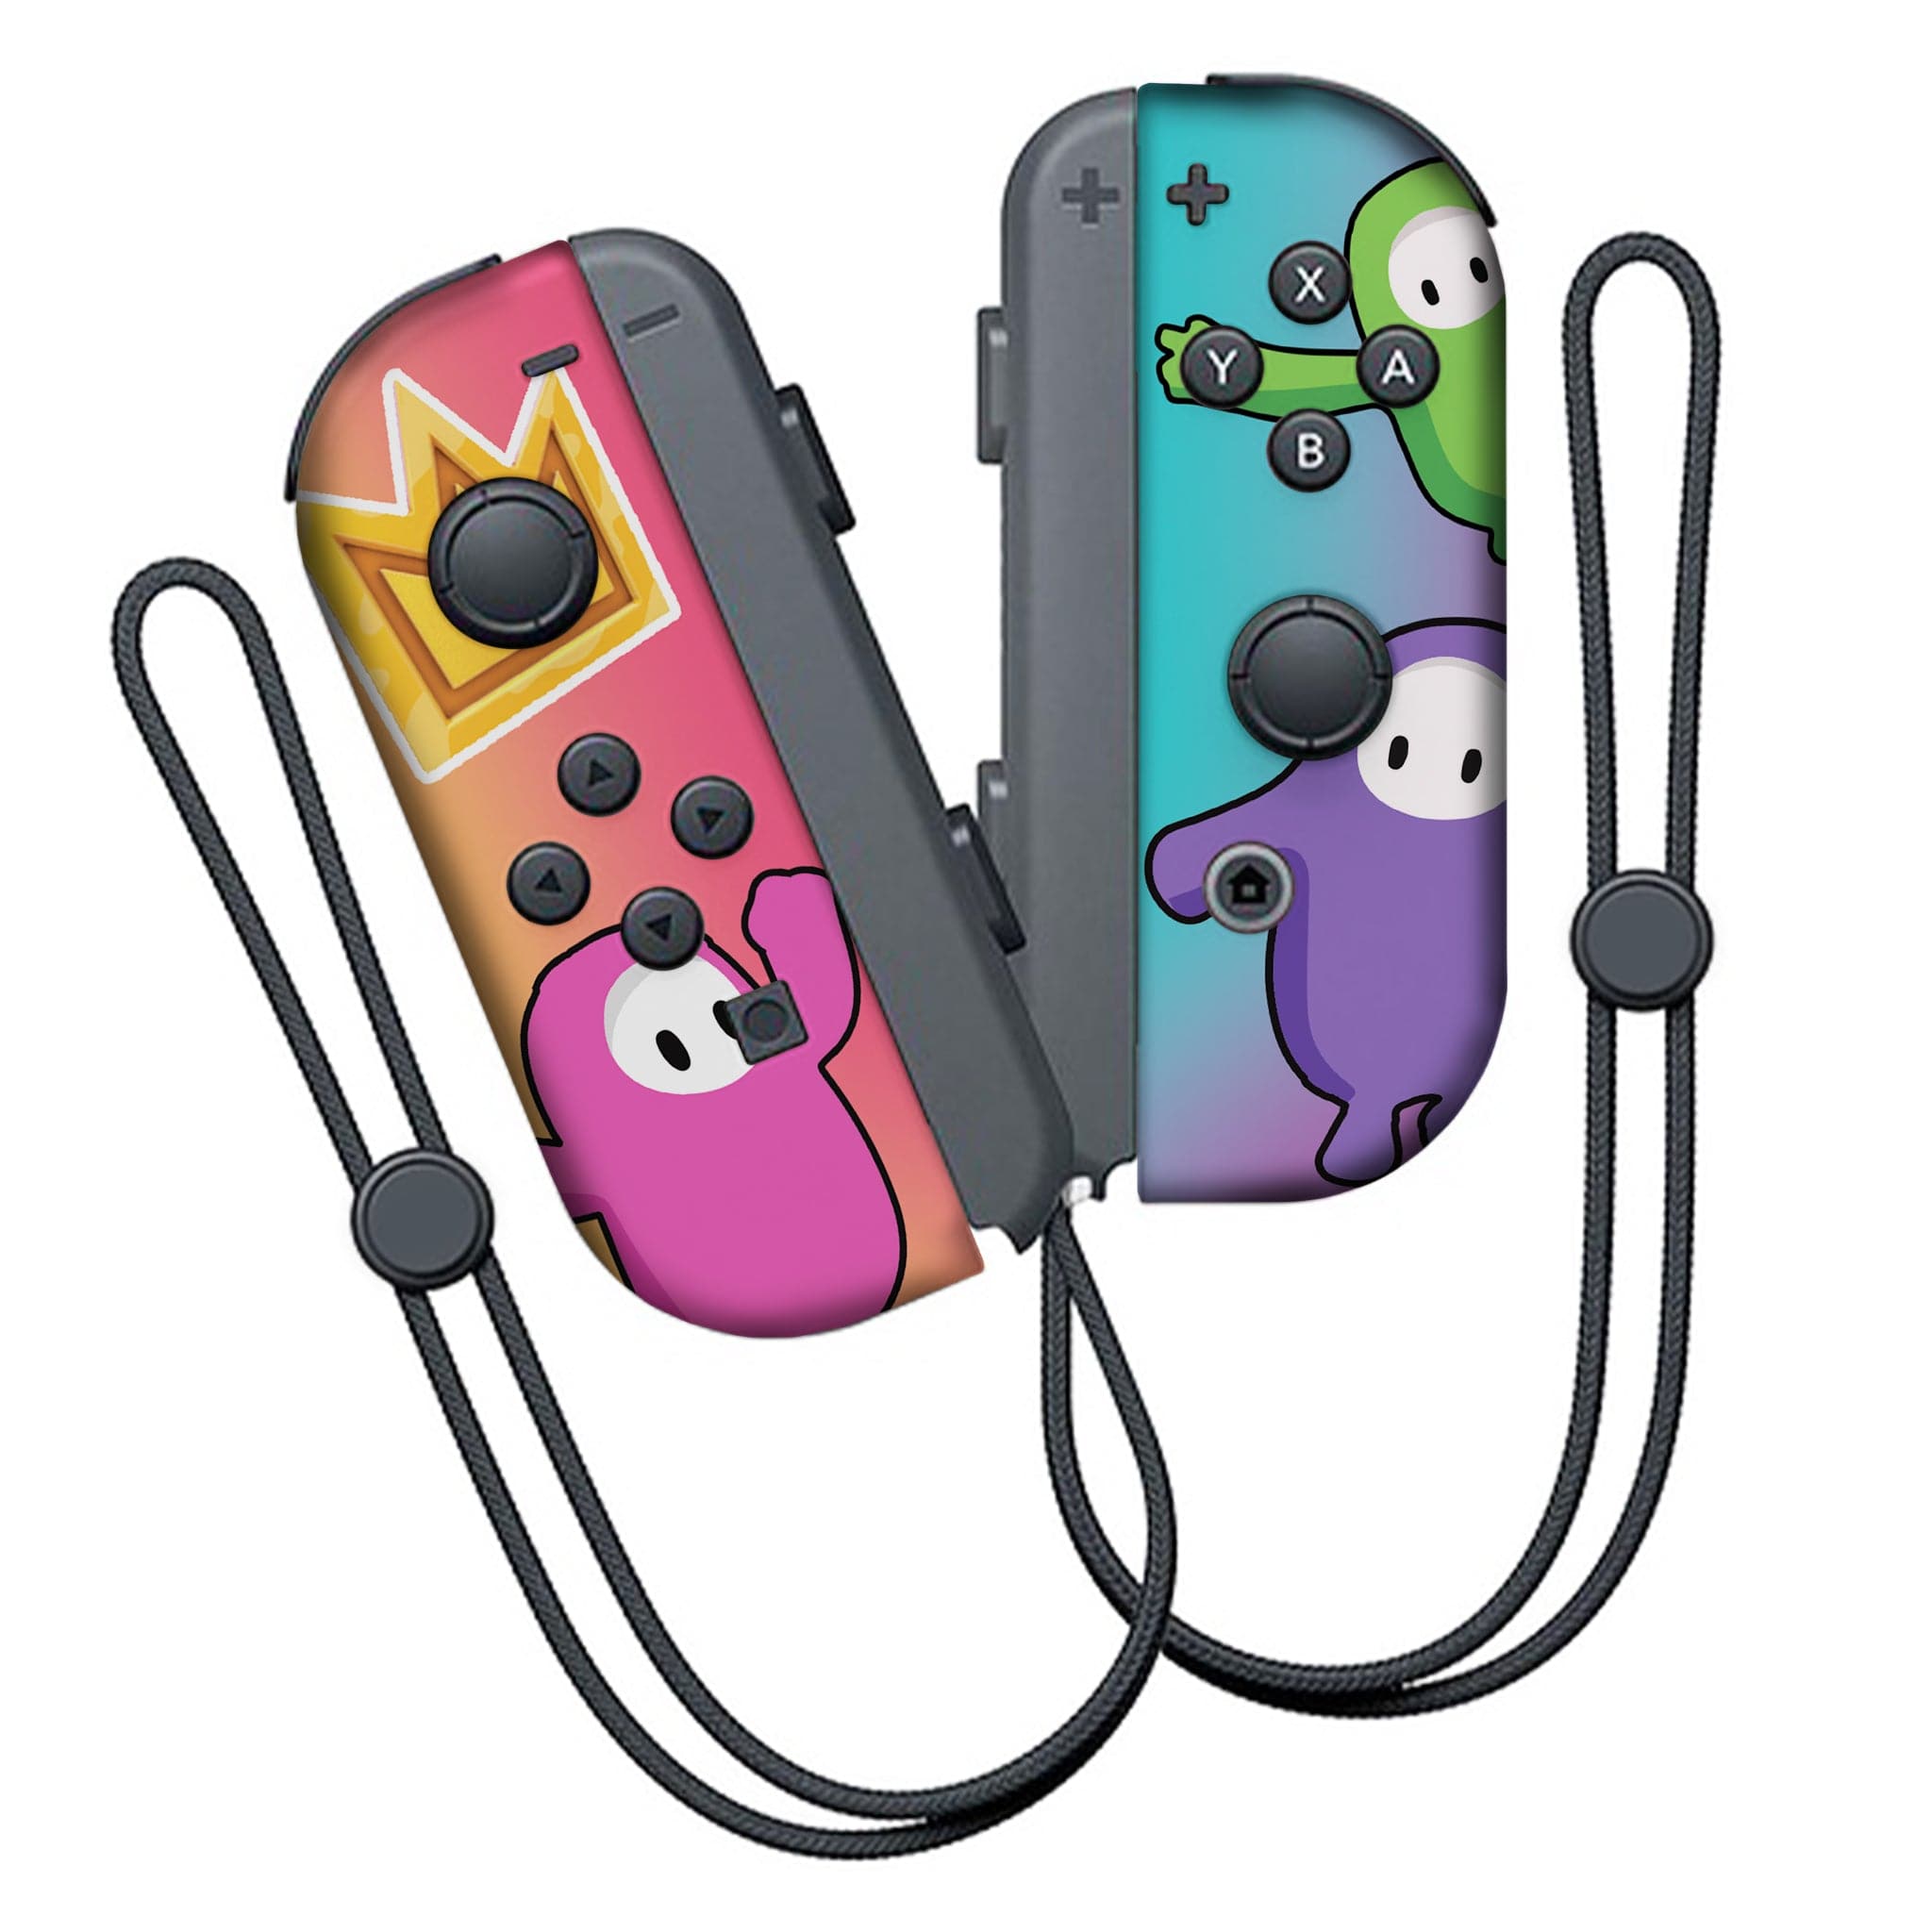 Fall Guys Inspired Nintendo Switch Joy-Con Left and Right Switch  Controllers by Nintendo